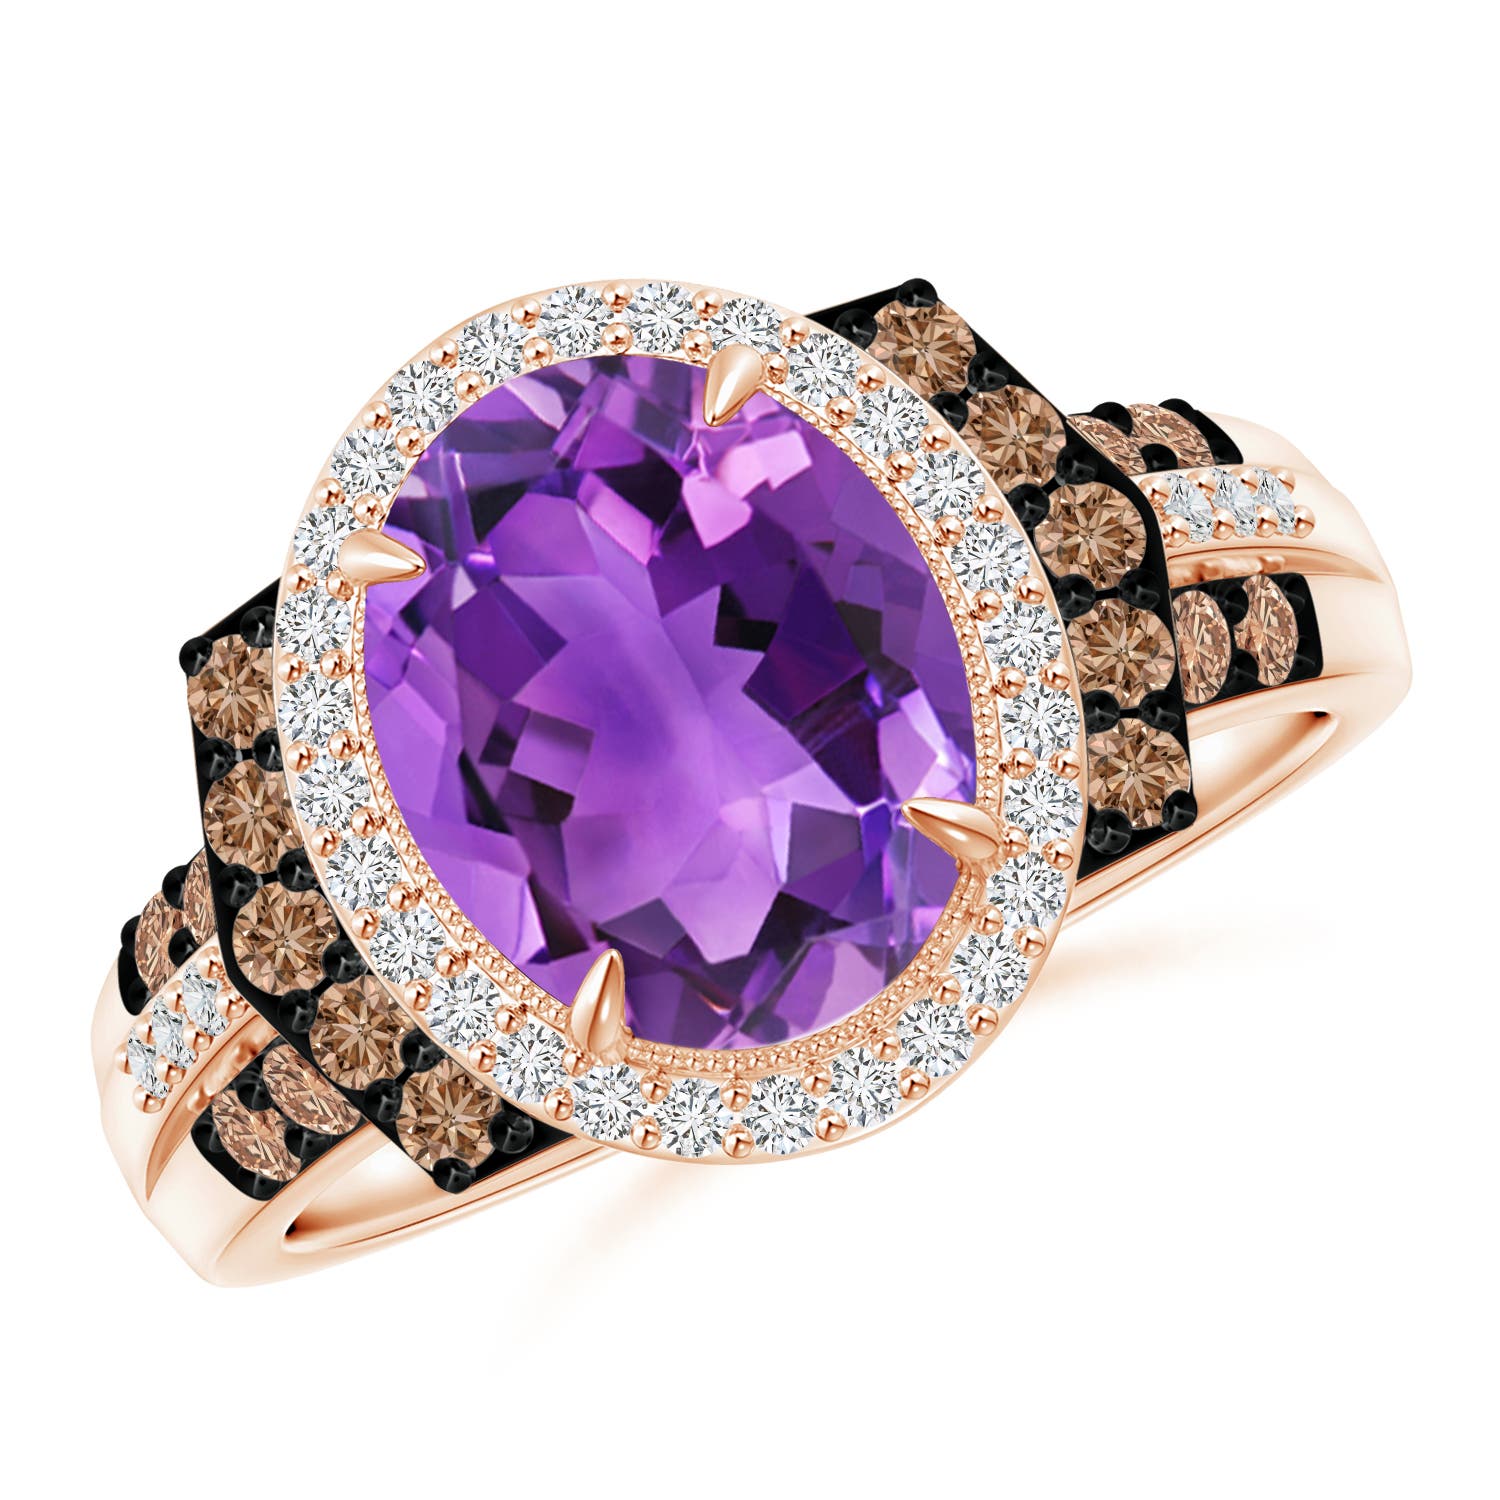 AAA - Amethyst / 2.81 CT / 14 KT Rose Gold